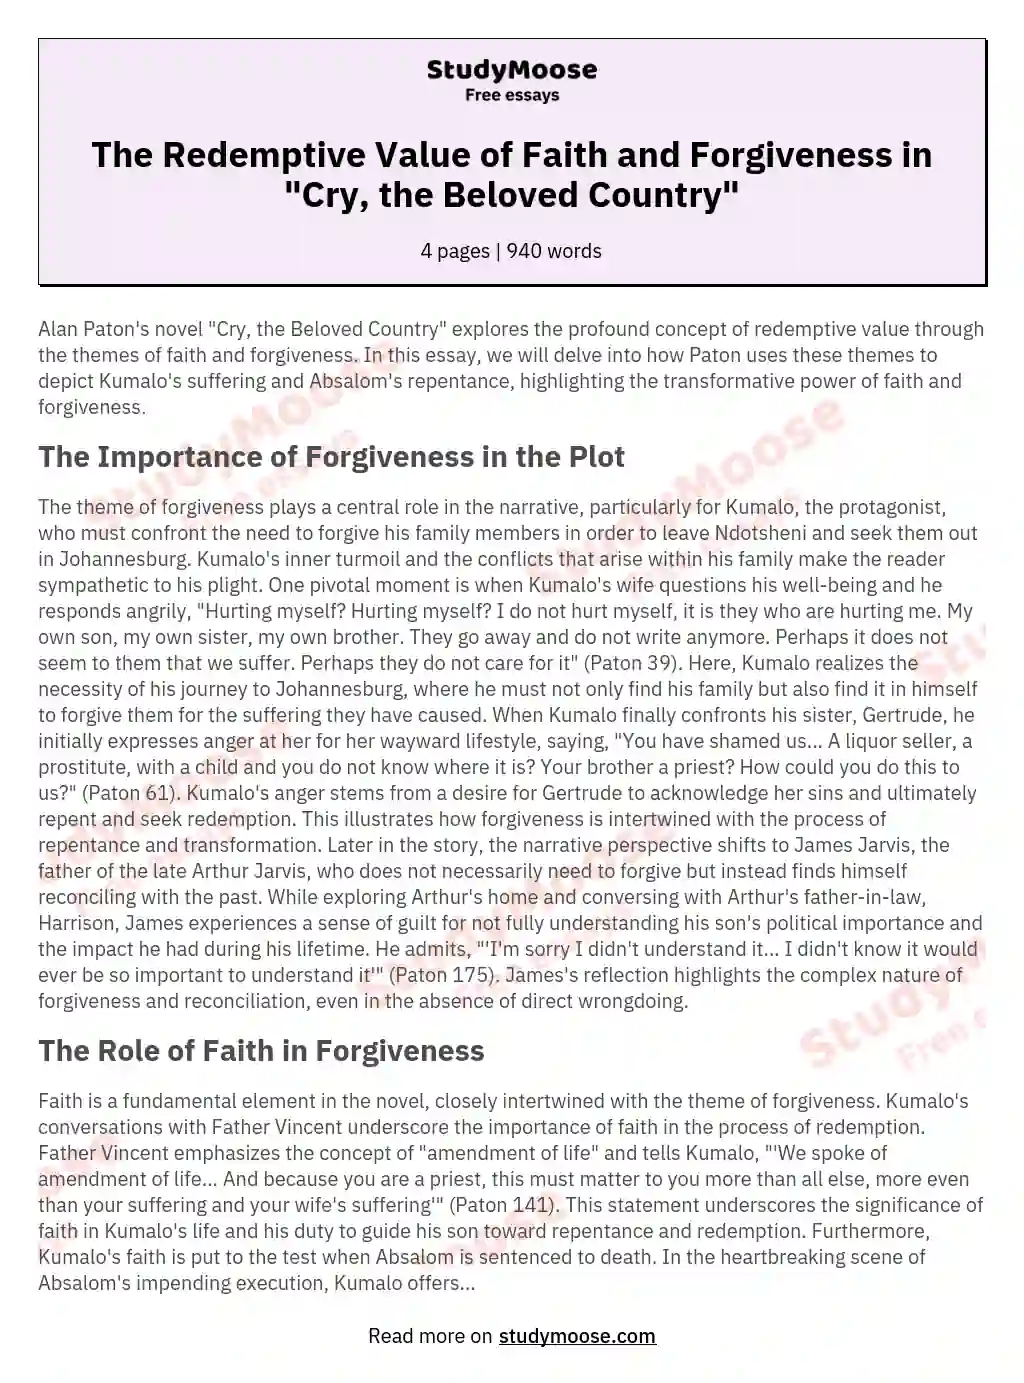 The Redemptive Value of Faith and Forgiveness in "Cry, the Beloved Country" essay